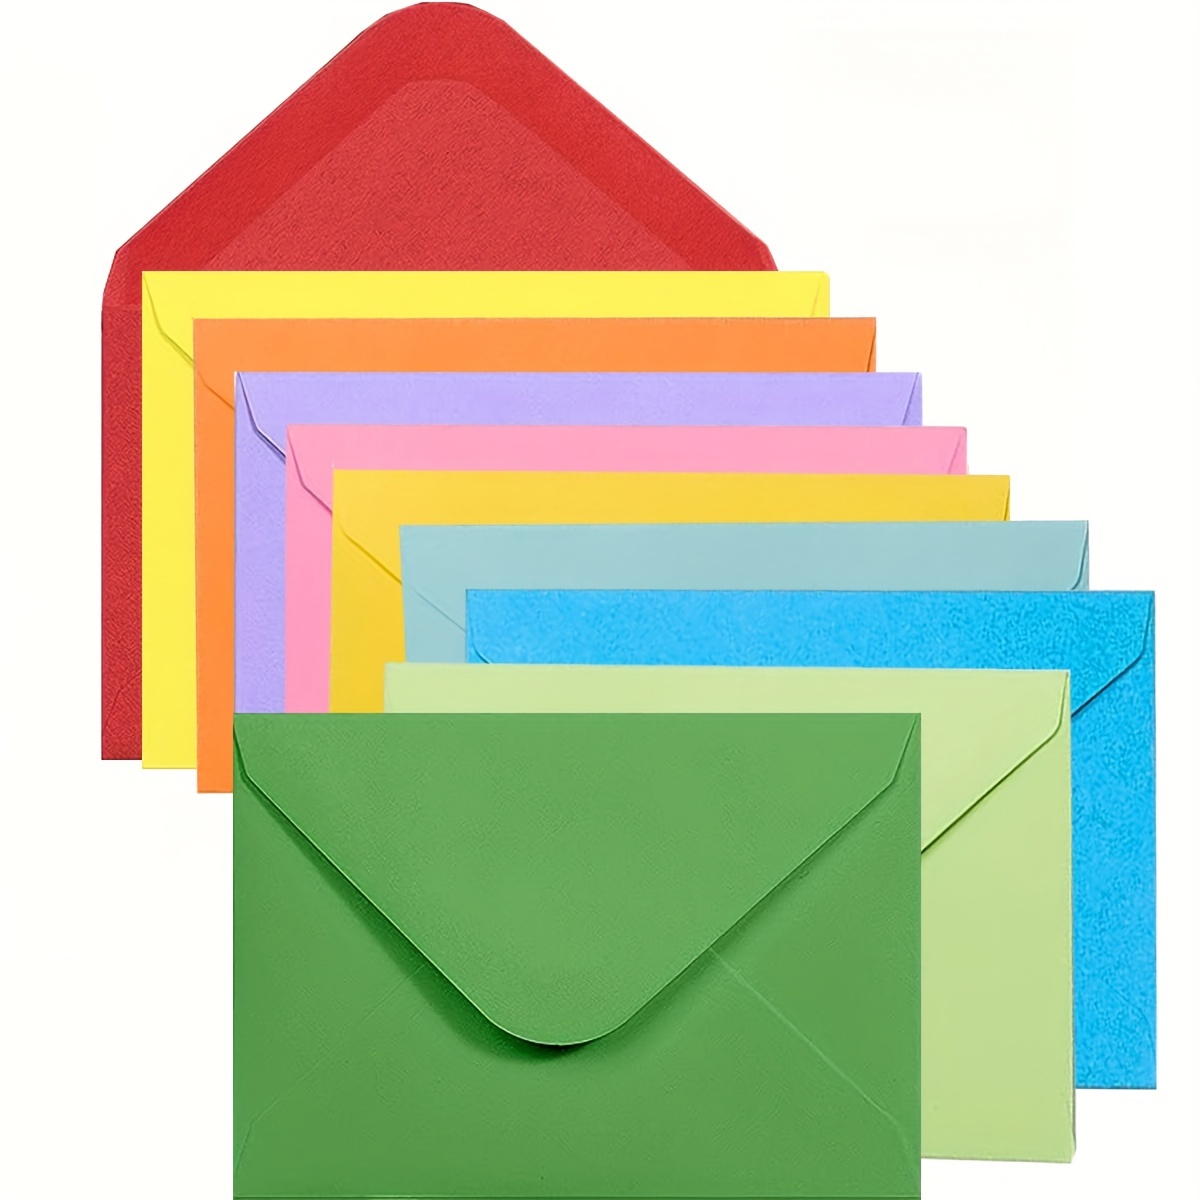 100 Pack Colored 4x6 Envelopes for Invitations, Birthday Cards, Wedding,  Photos, Self-Adhesive Peel-Off-and-Stick (A6, 7 Colors)